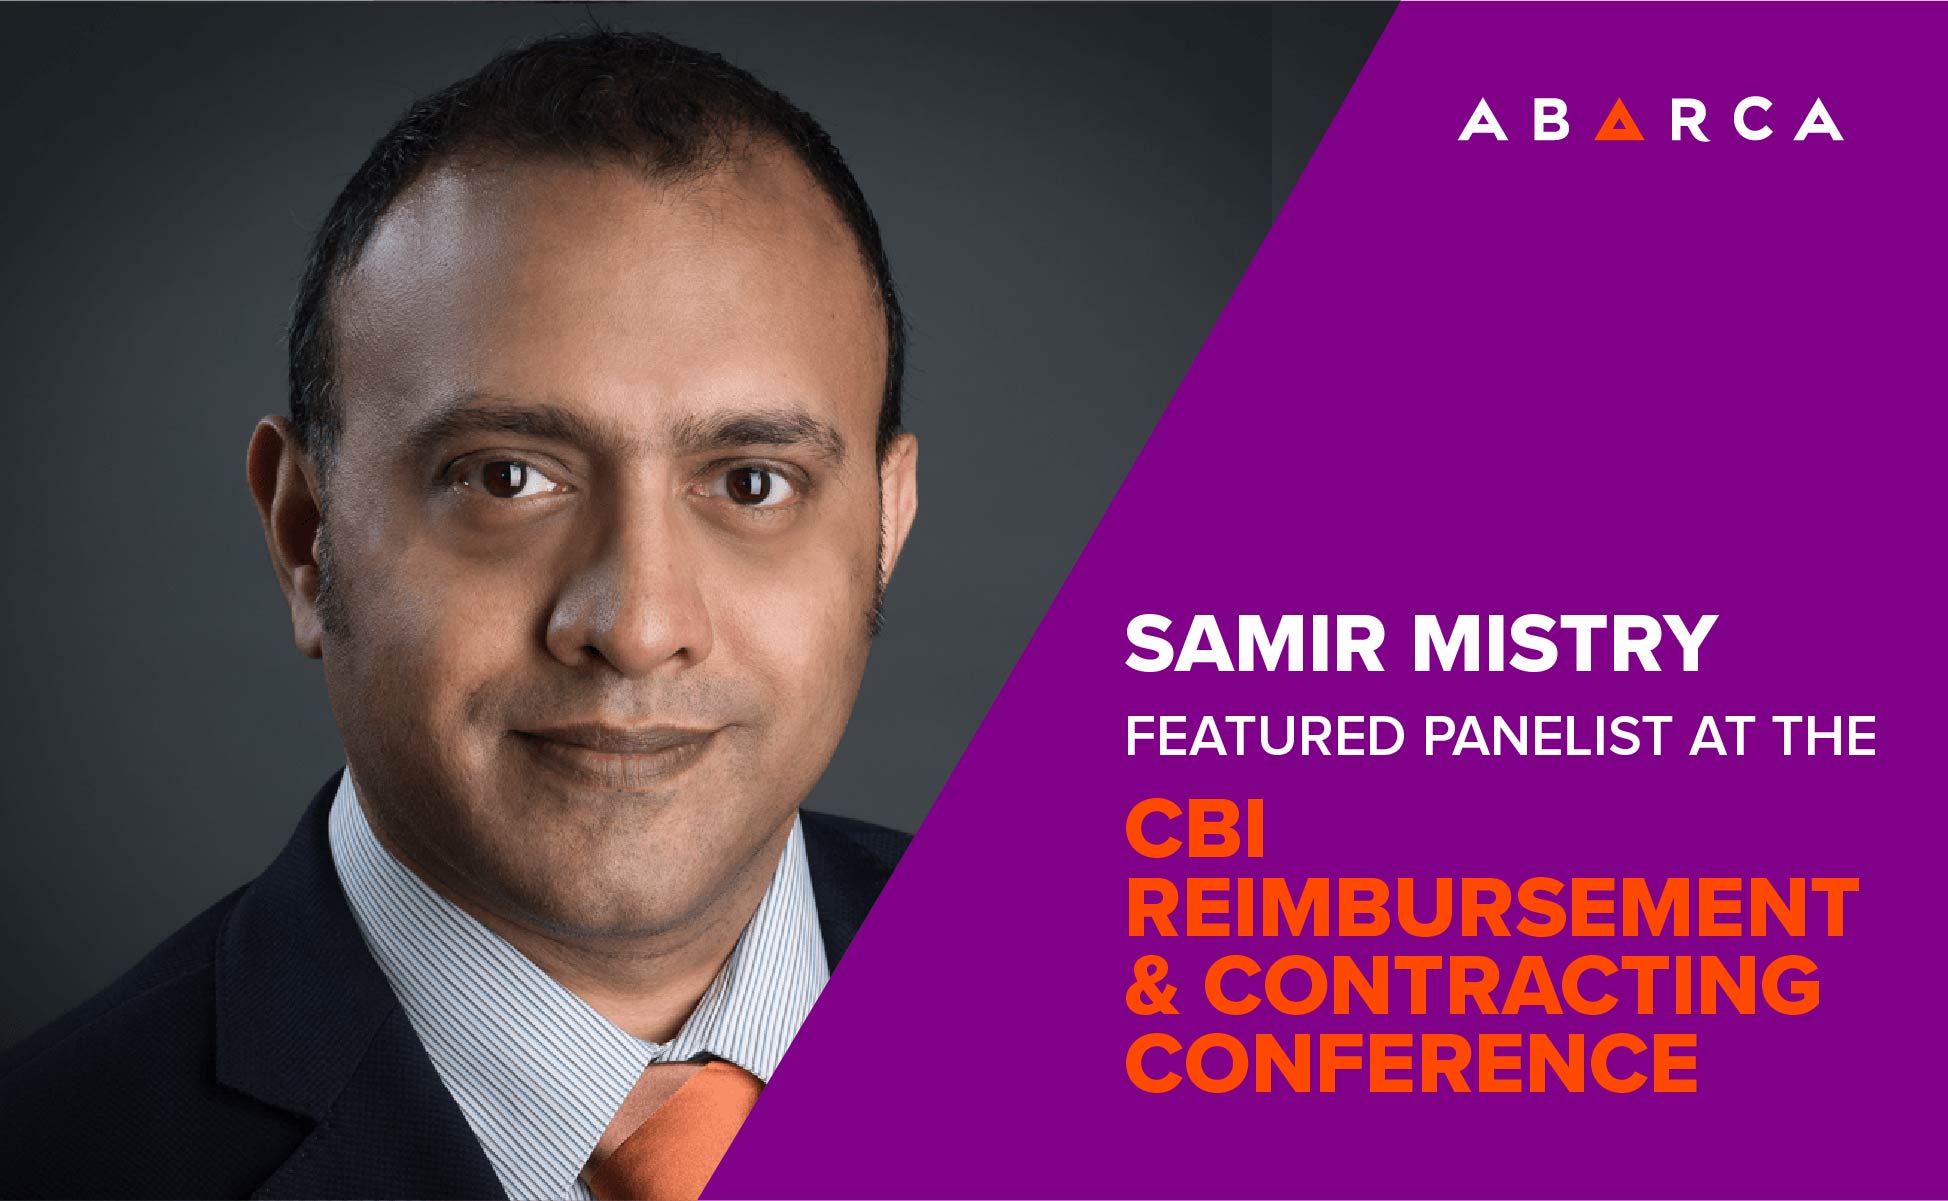 Abarca Health Executive Samir Mistry will be Featured Panelist at the 2018 CBI Reimbursement and Contracting Conference